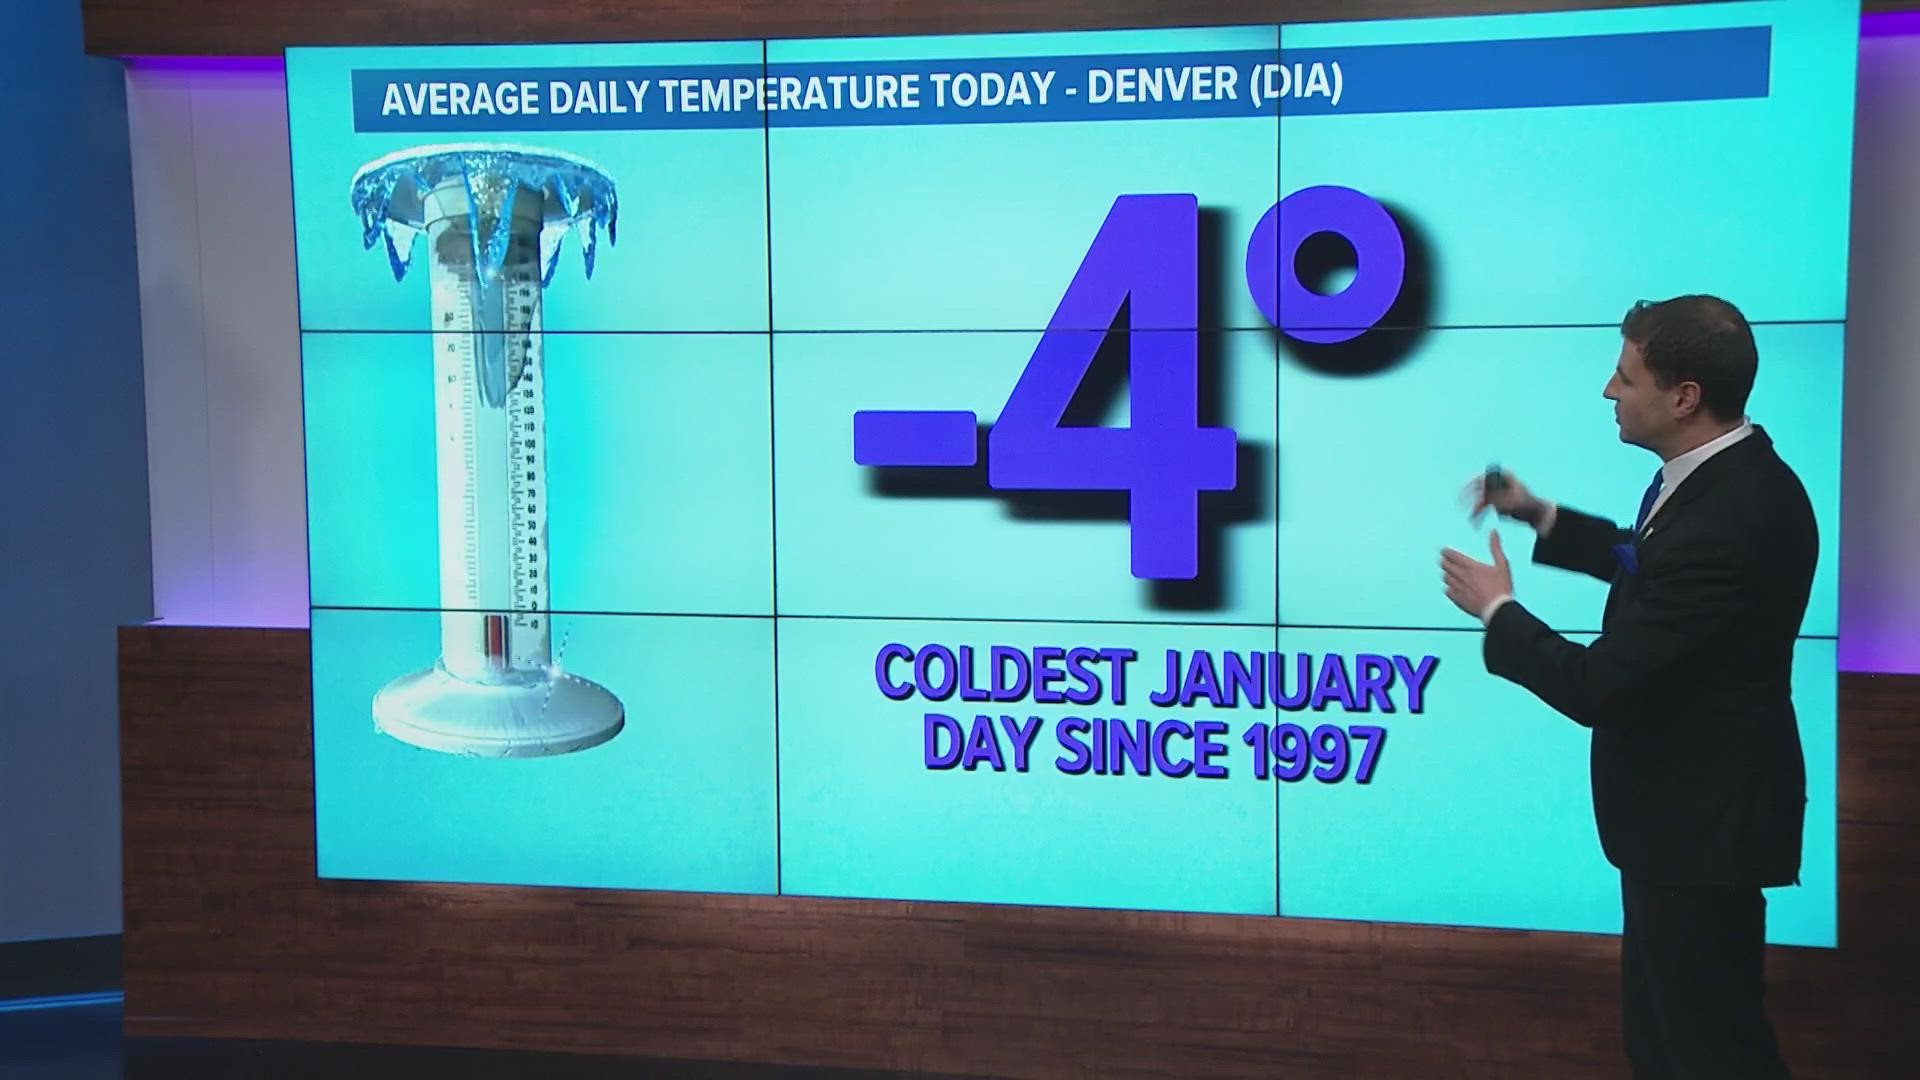 January has been colder than usual. Monday never climbed above single digit temperatures in Denver. The cold snap breaks some long records.